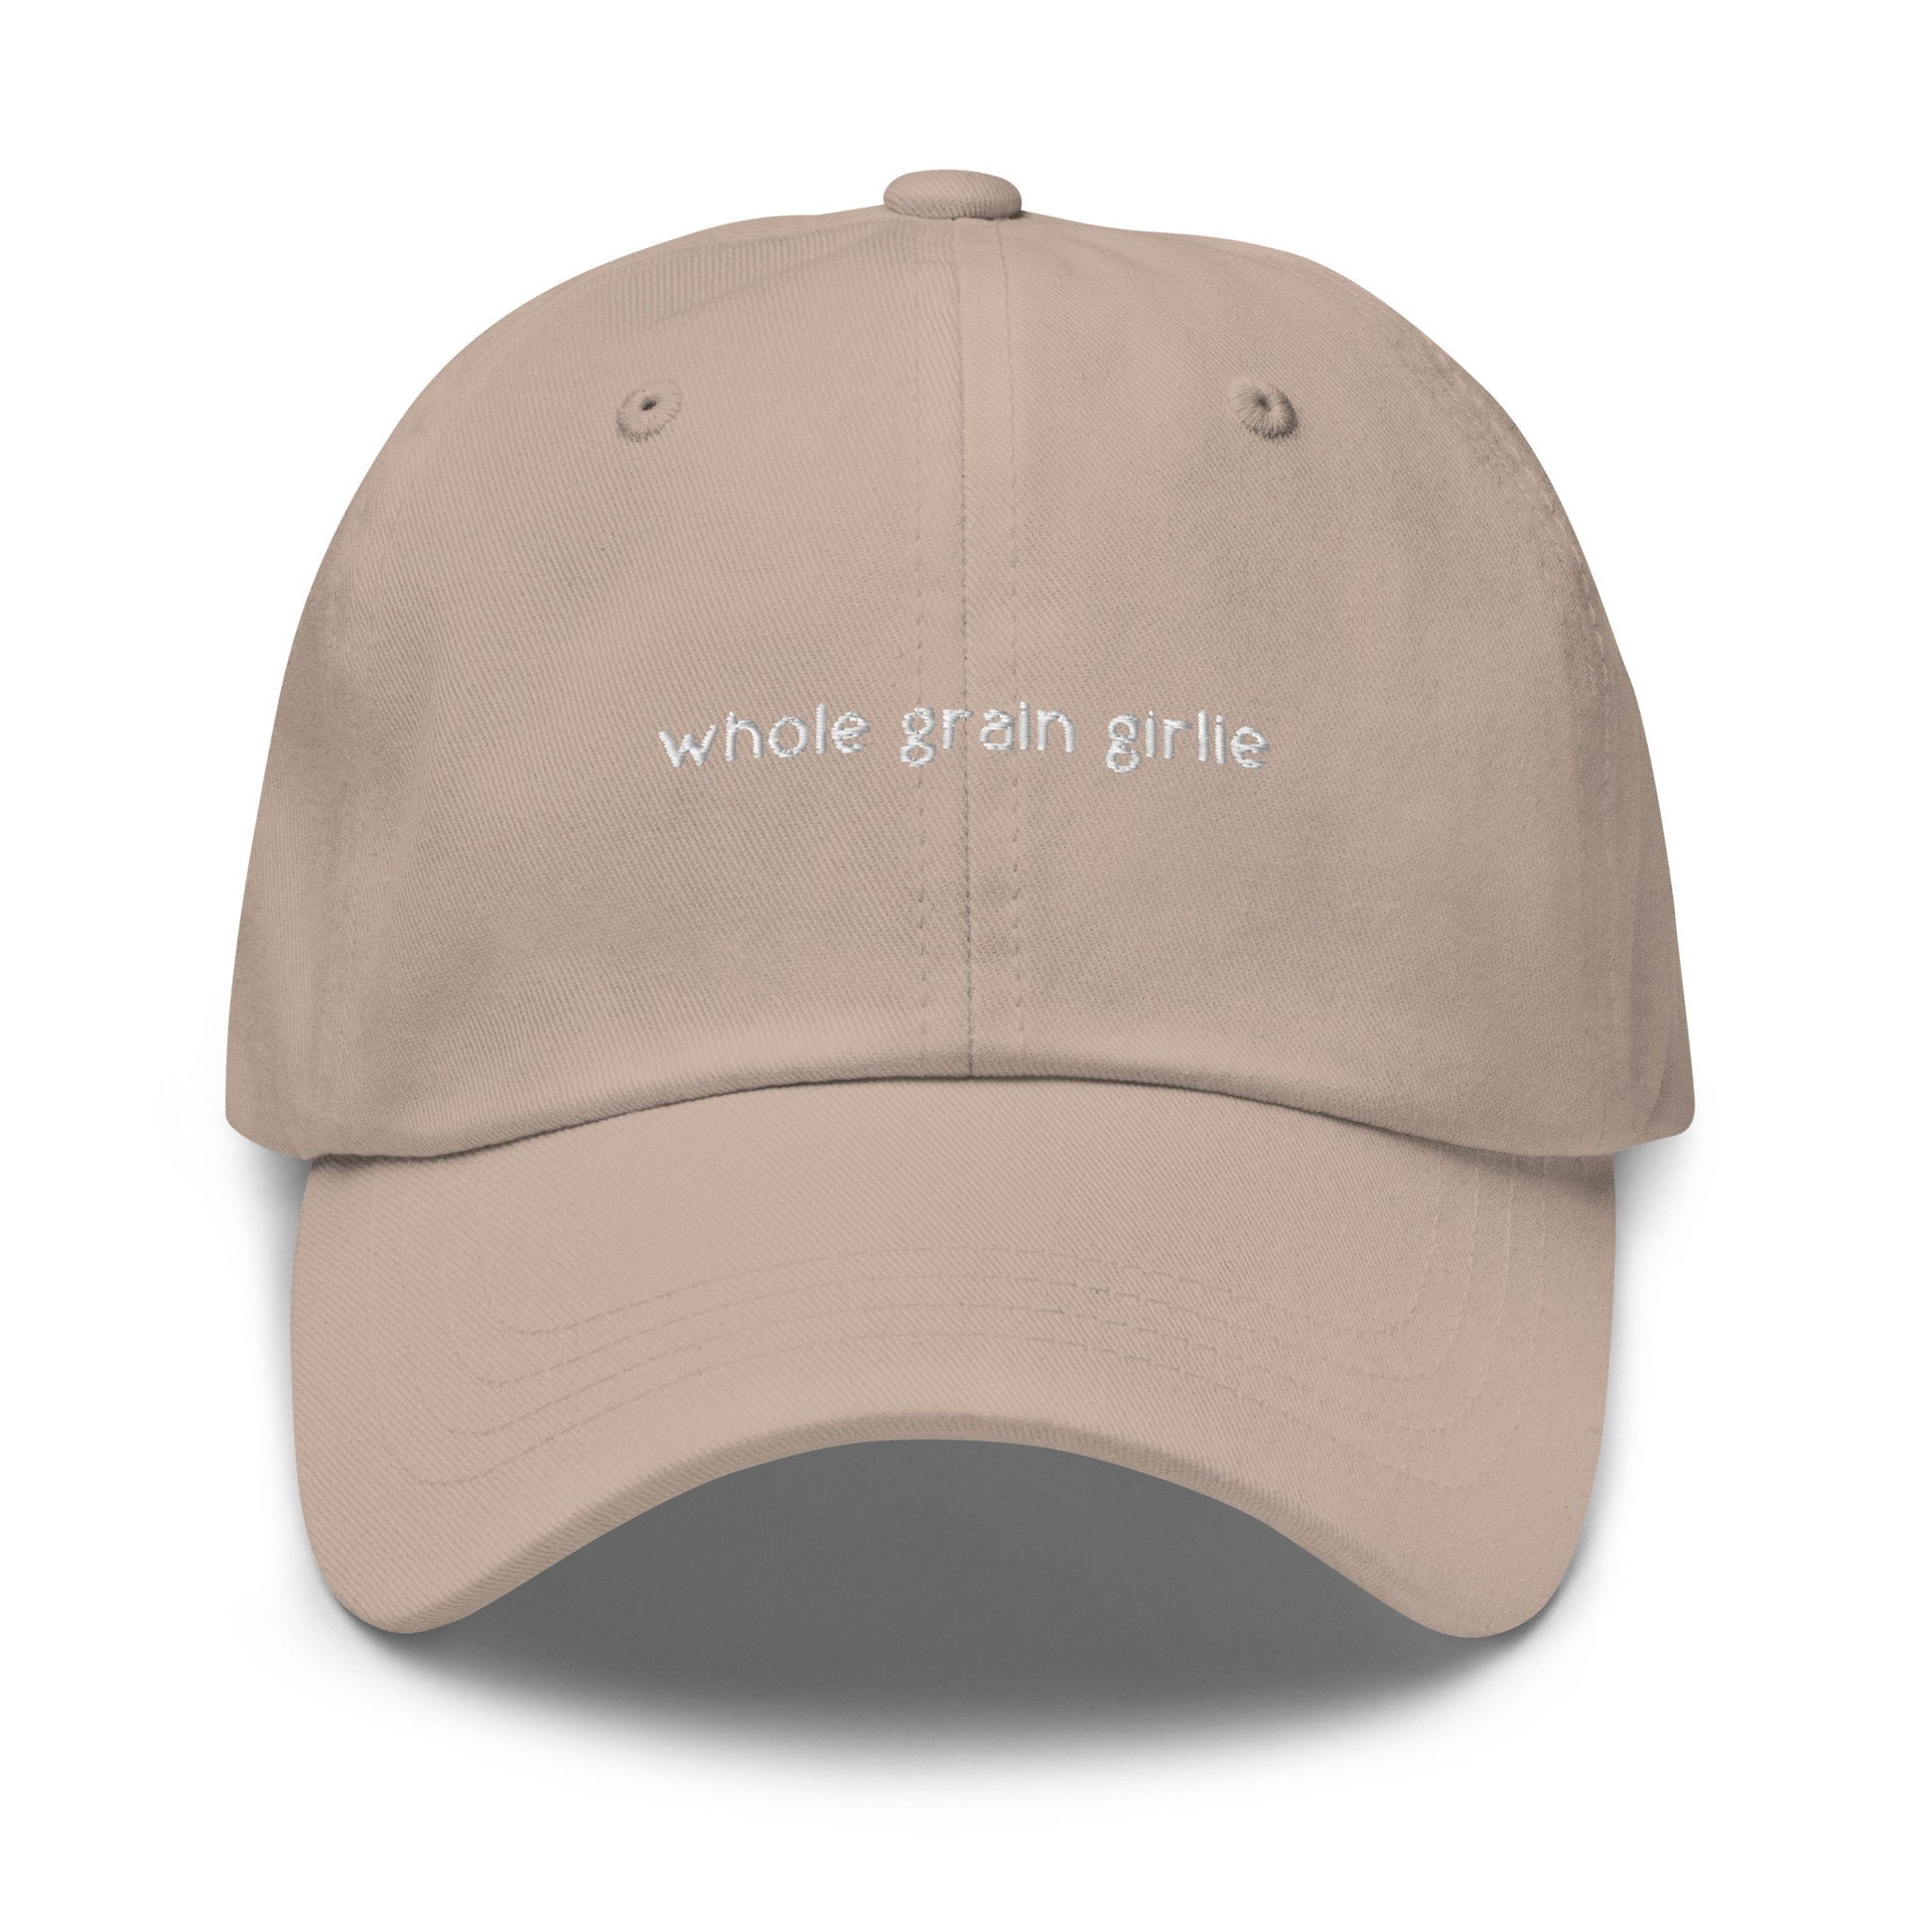 Whole Grain Hat - Gift for Healthy Active Nurtrition Girlies - Embroidered Cotton Hat - Multiple Colors